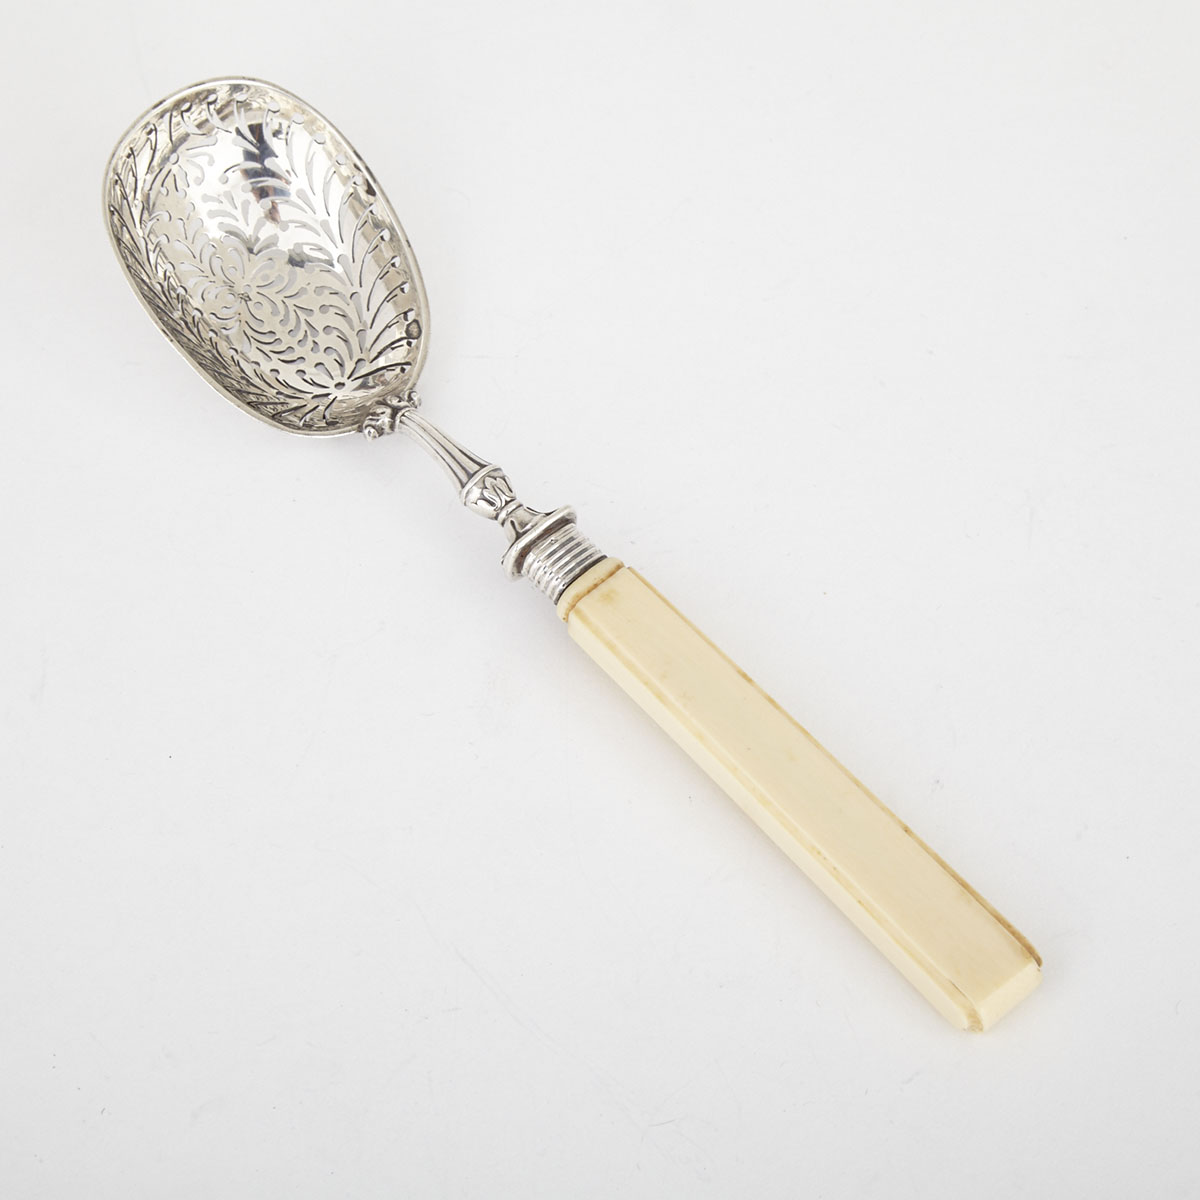 French Silver Olive Spoon with Ivory Handle, Paris, 1819-38